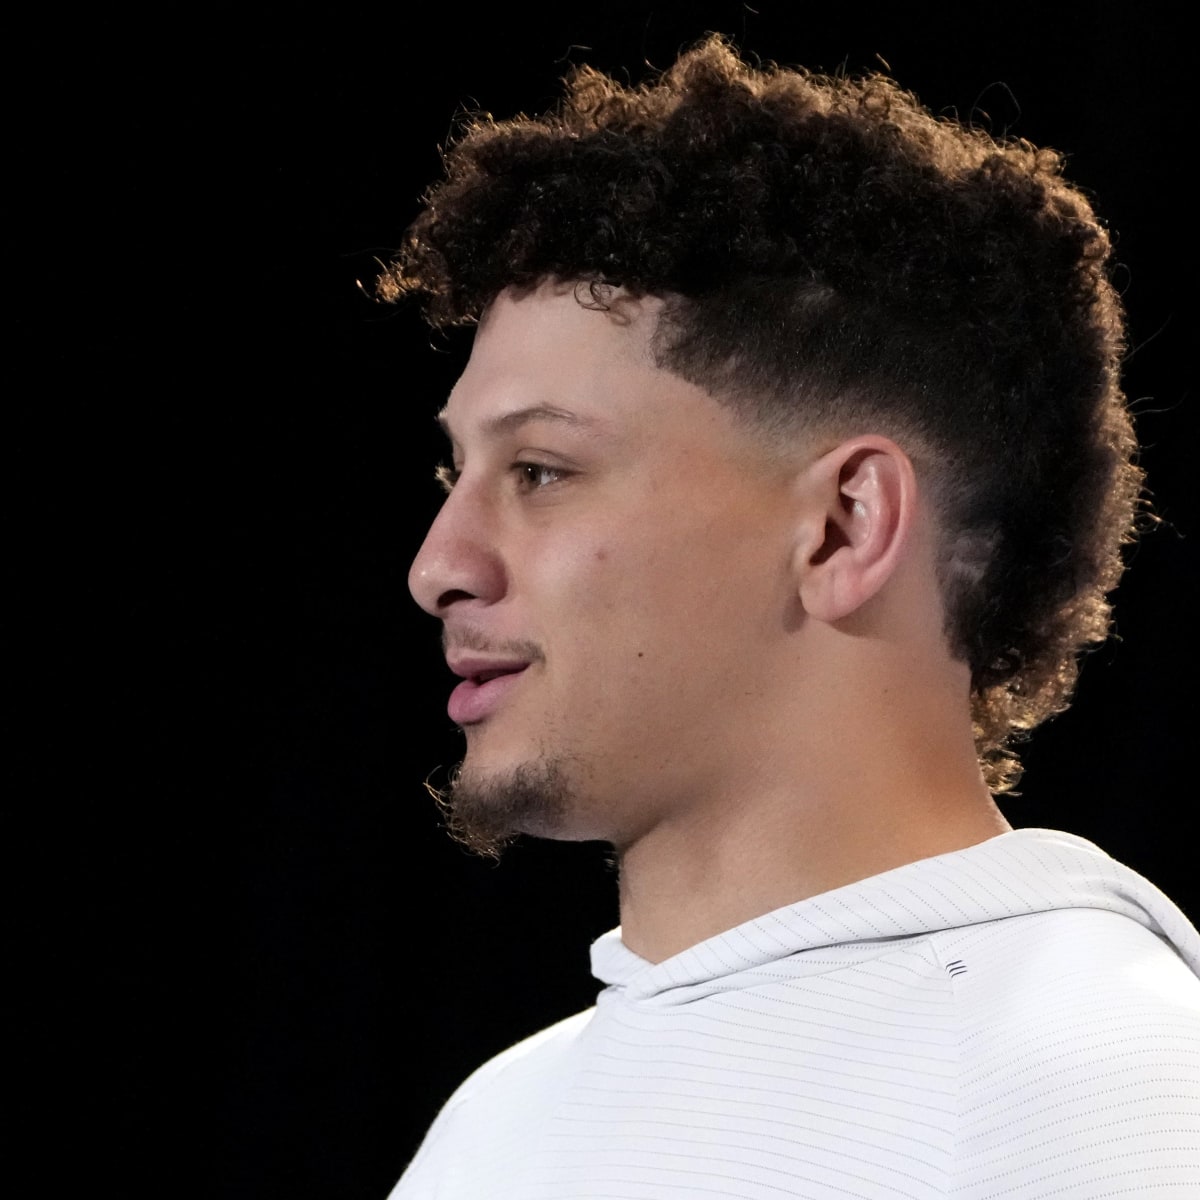 Mahomes reflects on his historic career with Canaries